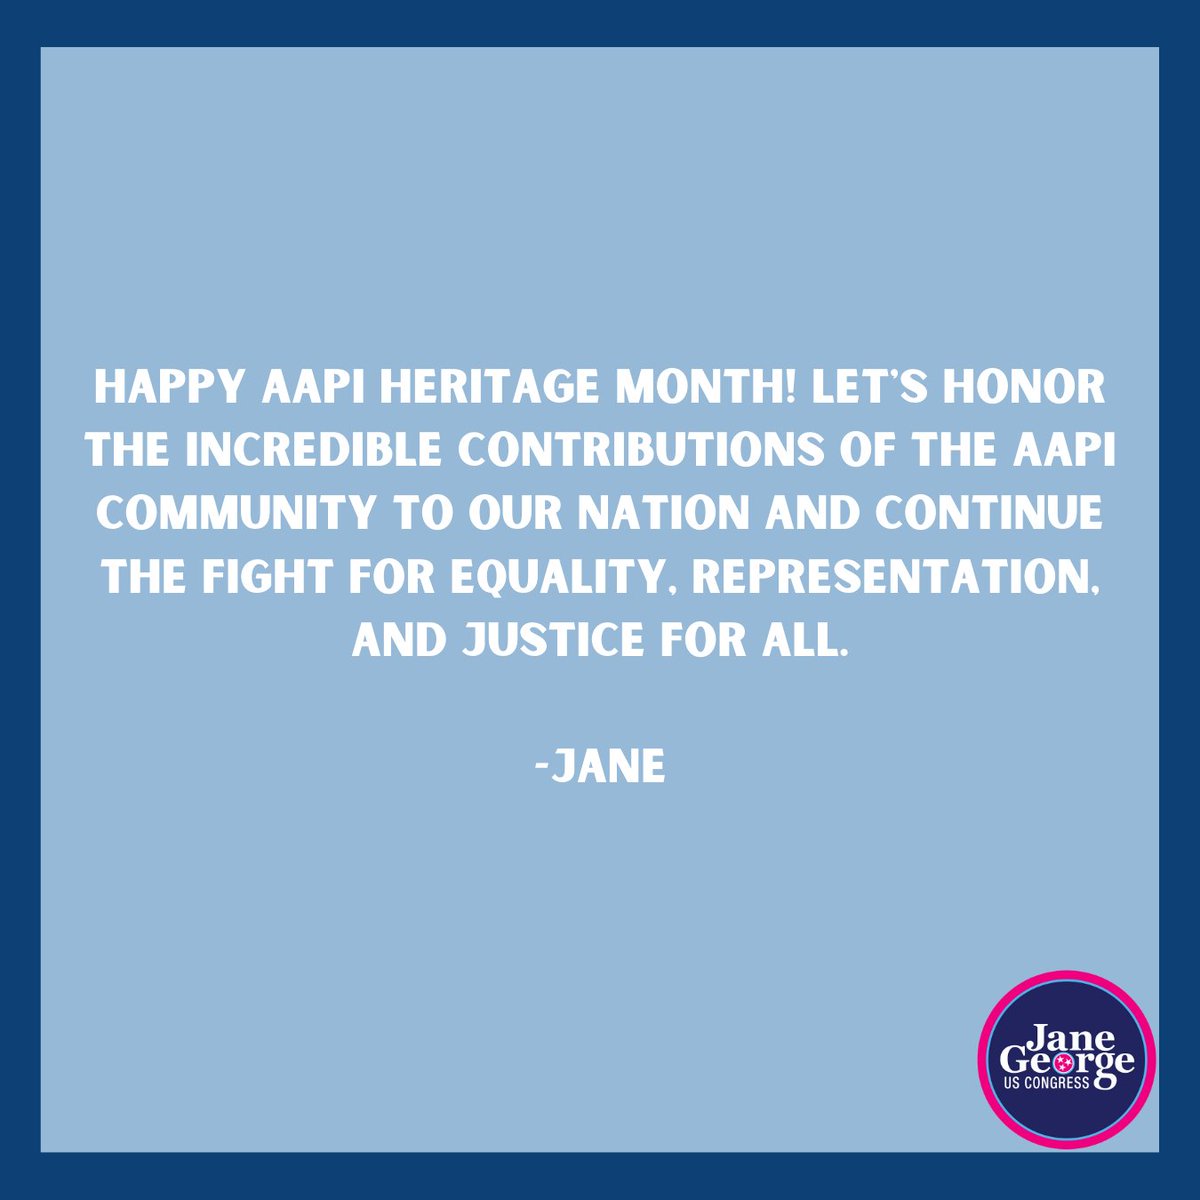 It's #AAPIHeritageMonth. Let's honor the AAPI community throughout the month!